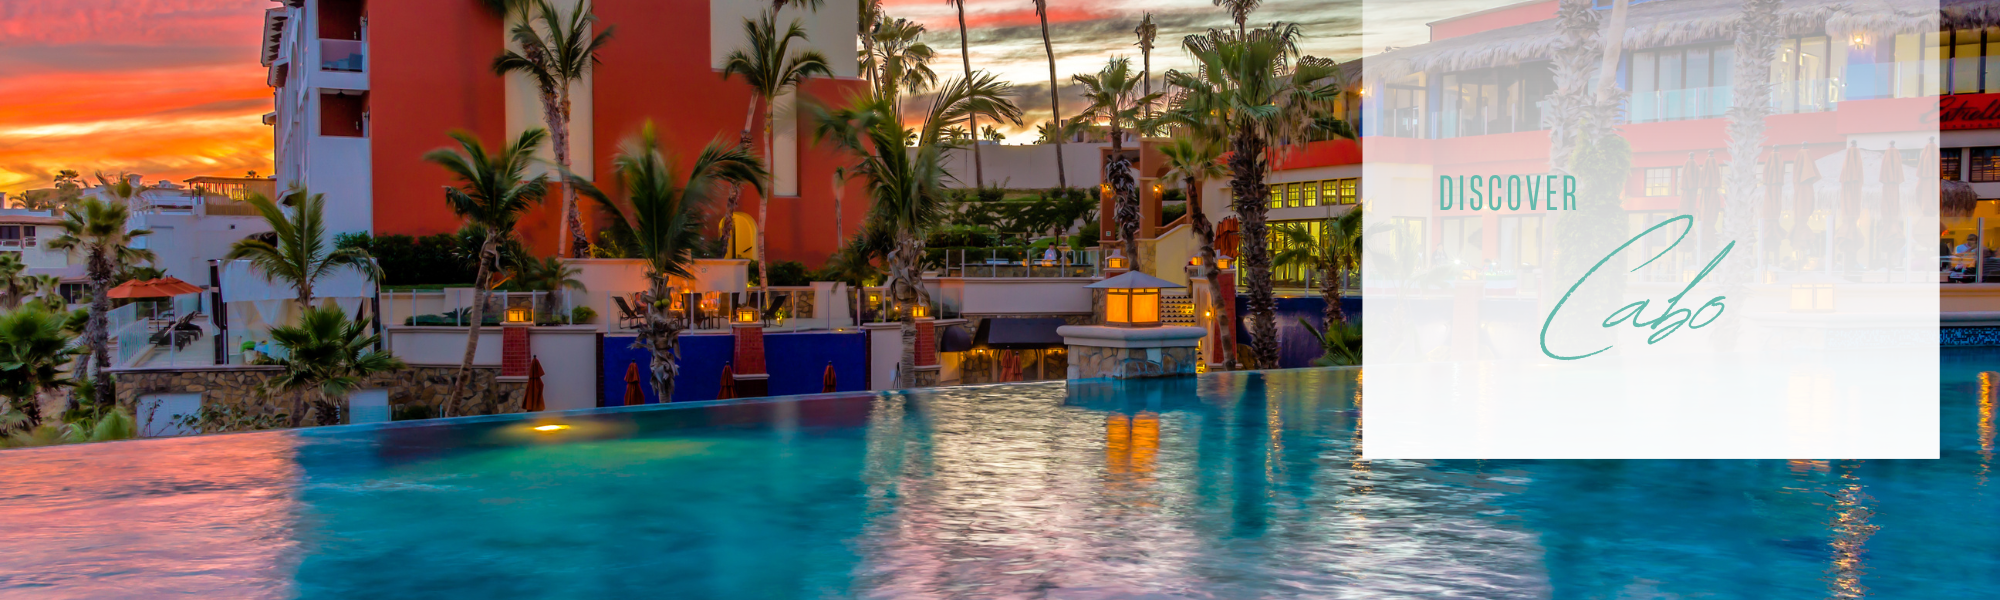 pool at beautiful sunset in cabo san lucas